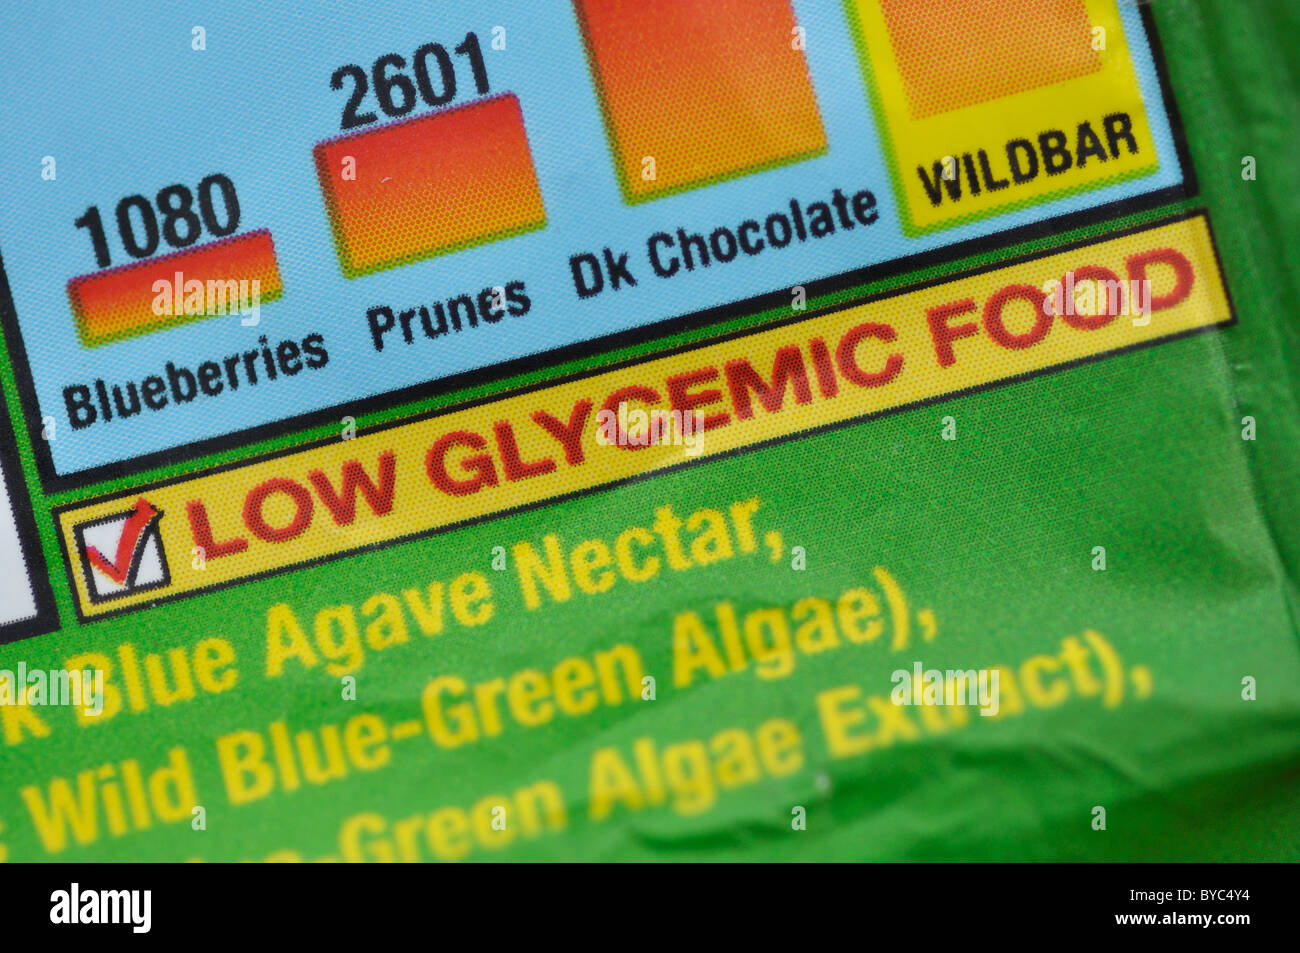 Low Glycemic Food written on raw chocolate bar package Stock Photo